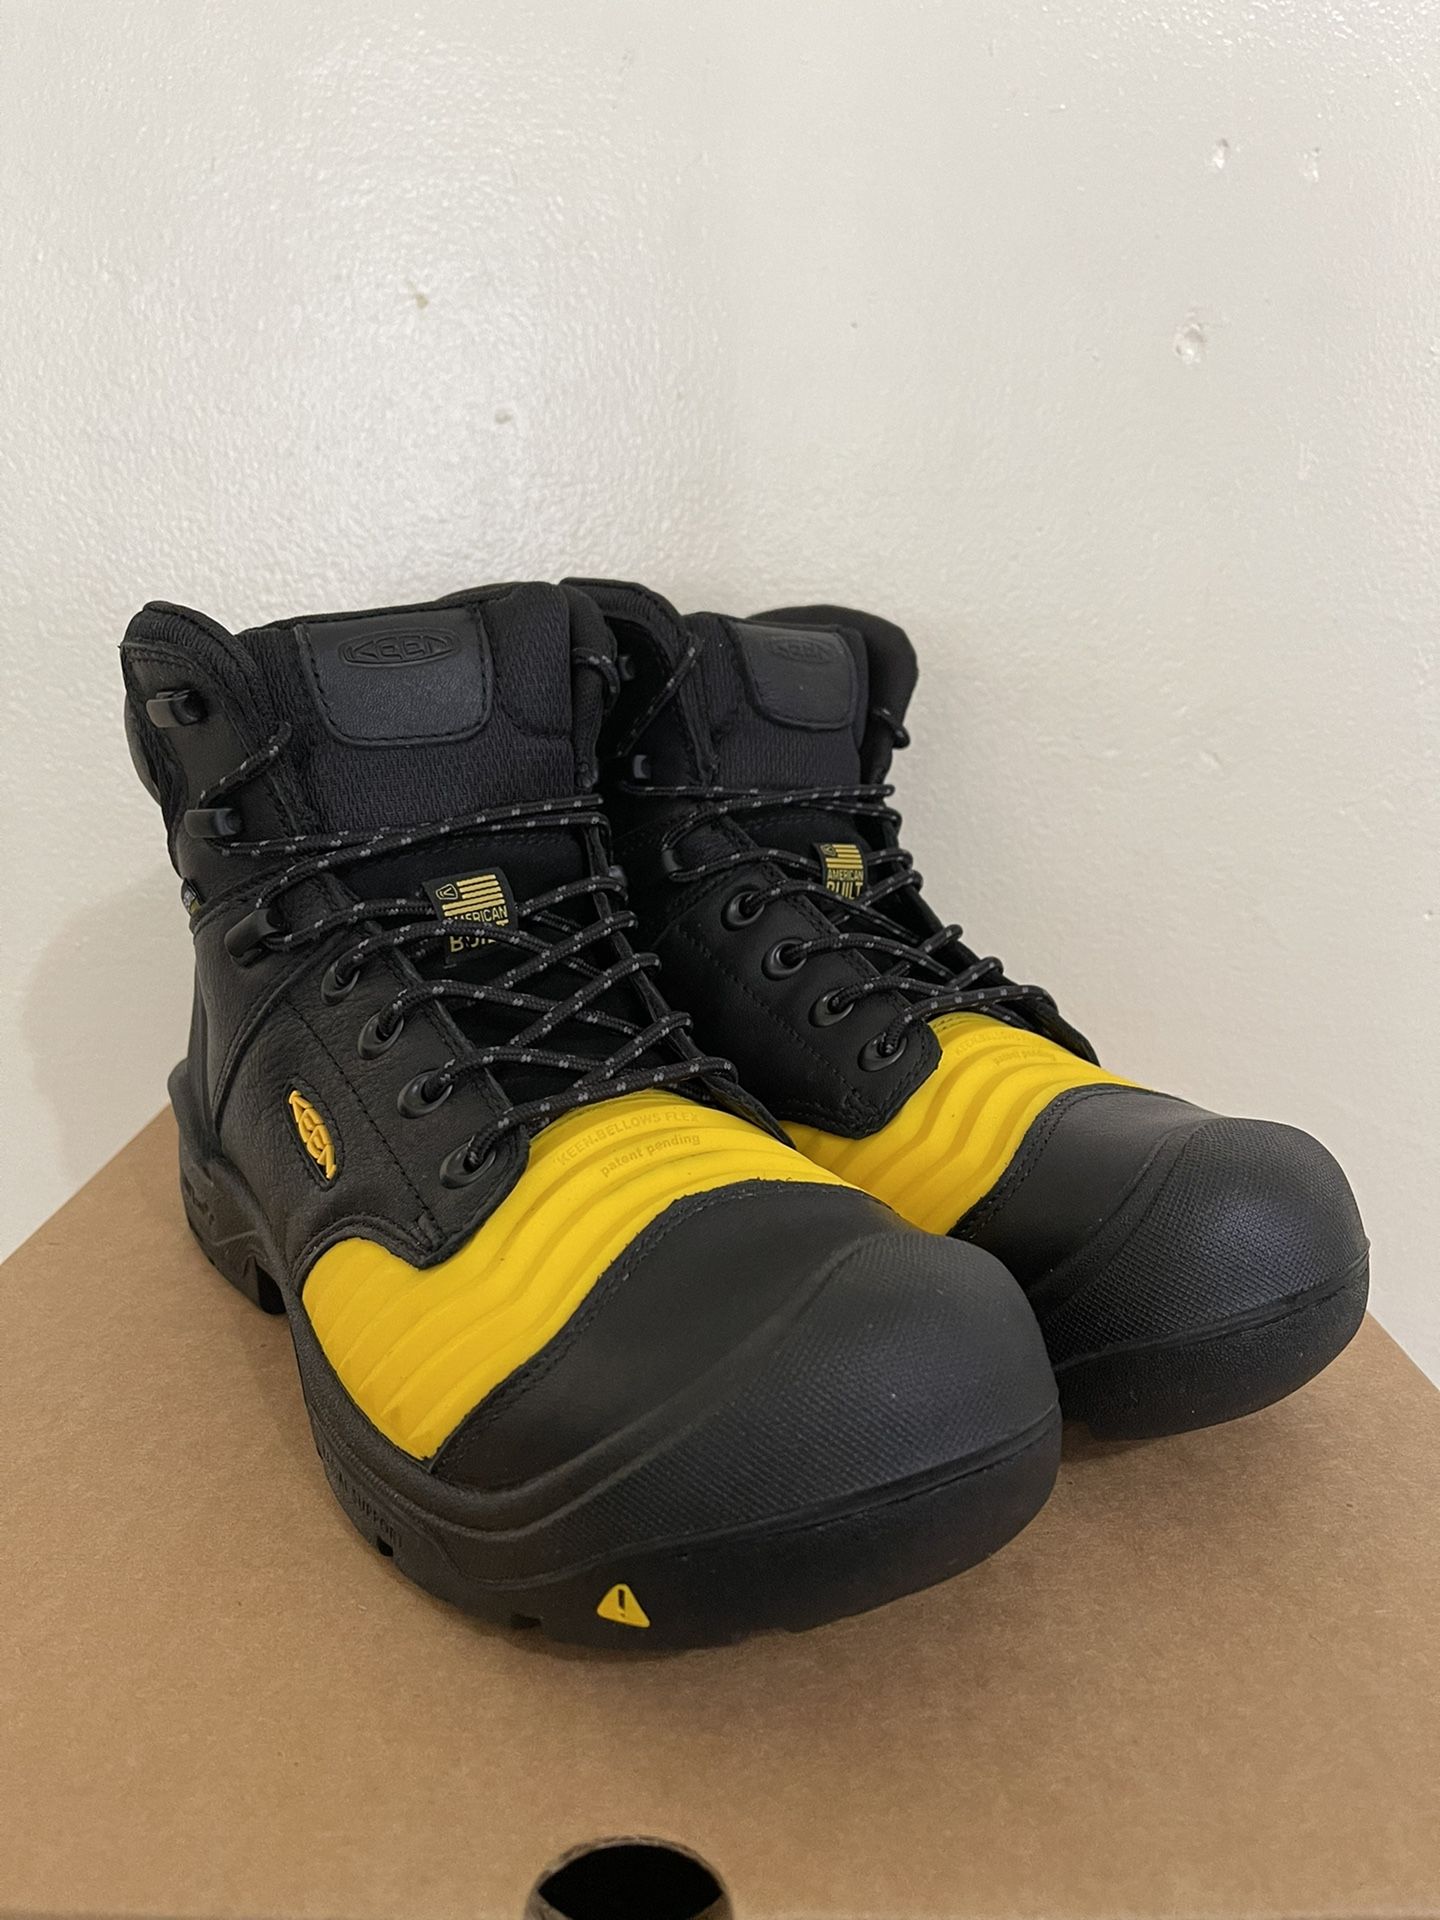 Keen Portland 6” Work Boots Safety Toe